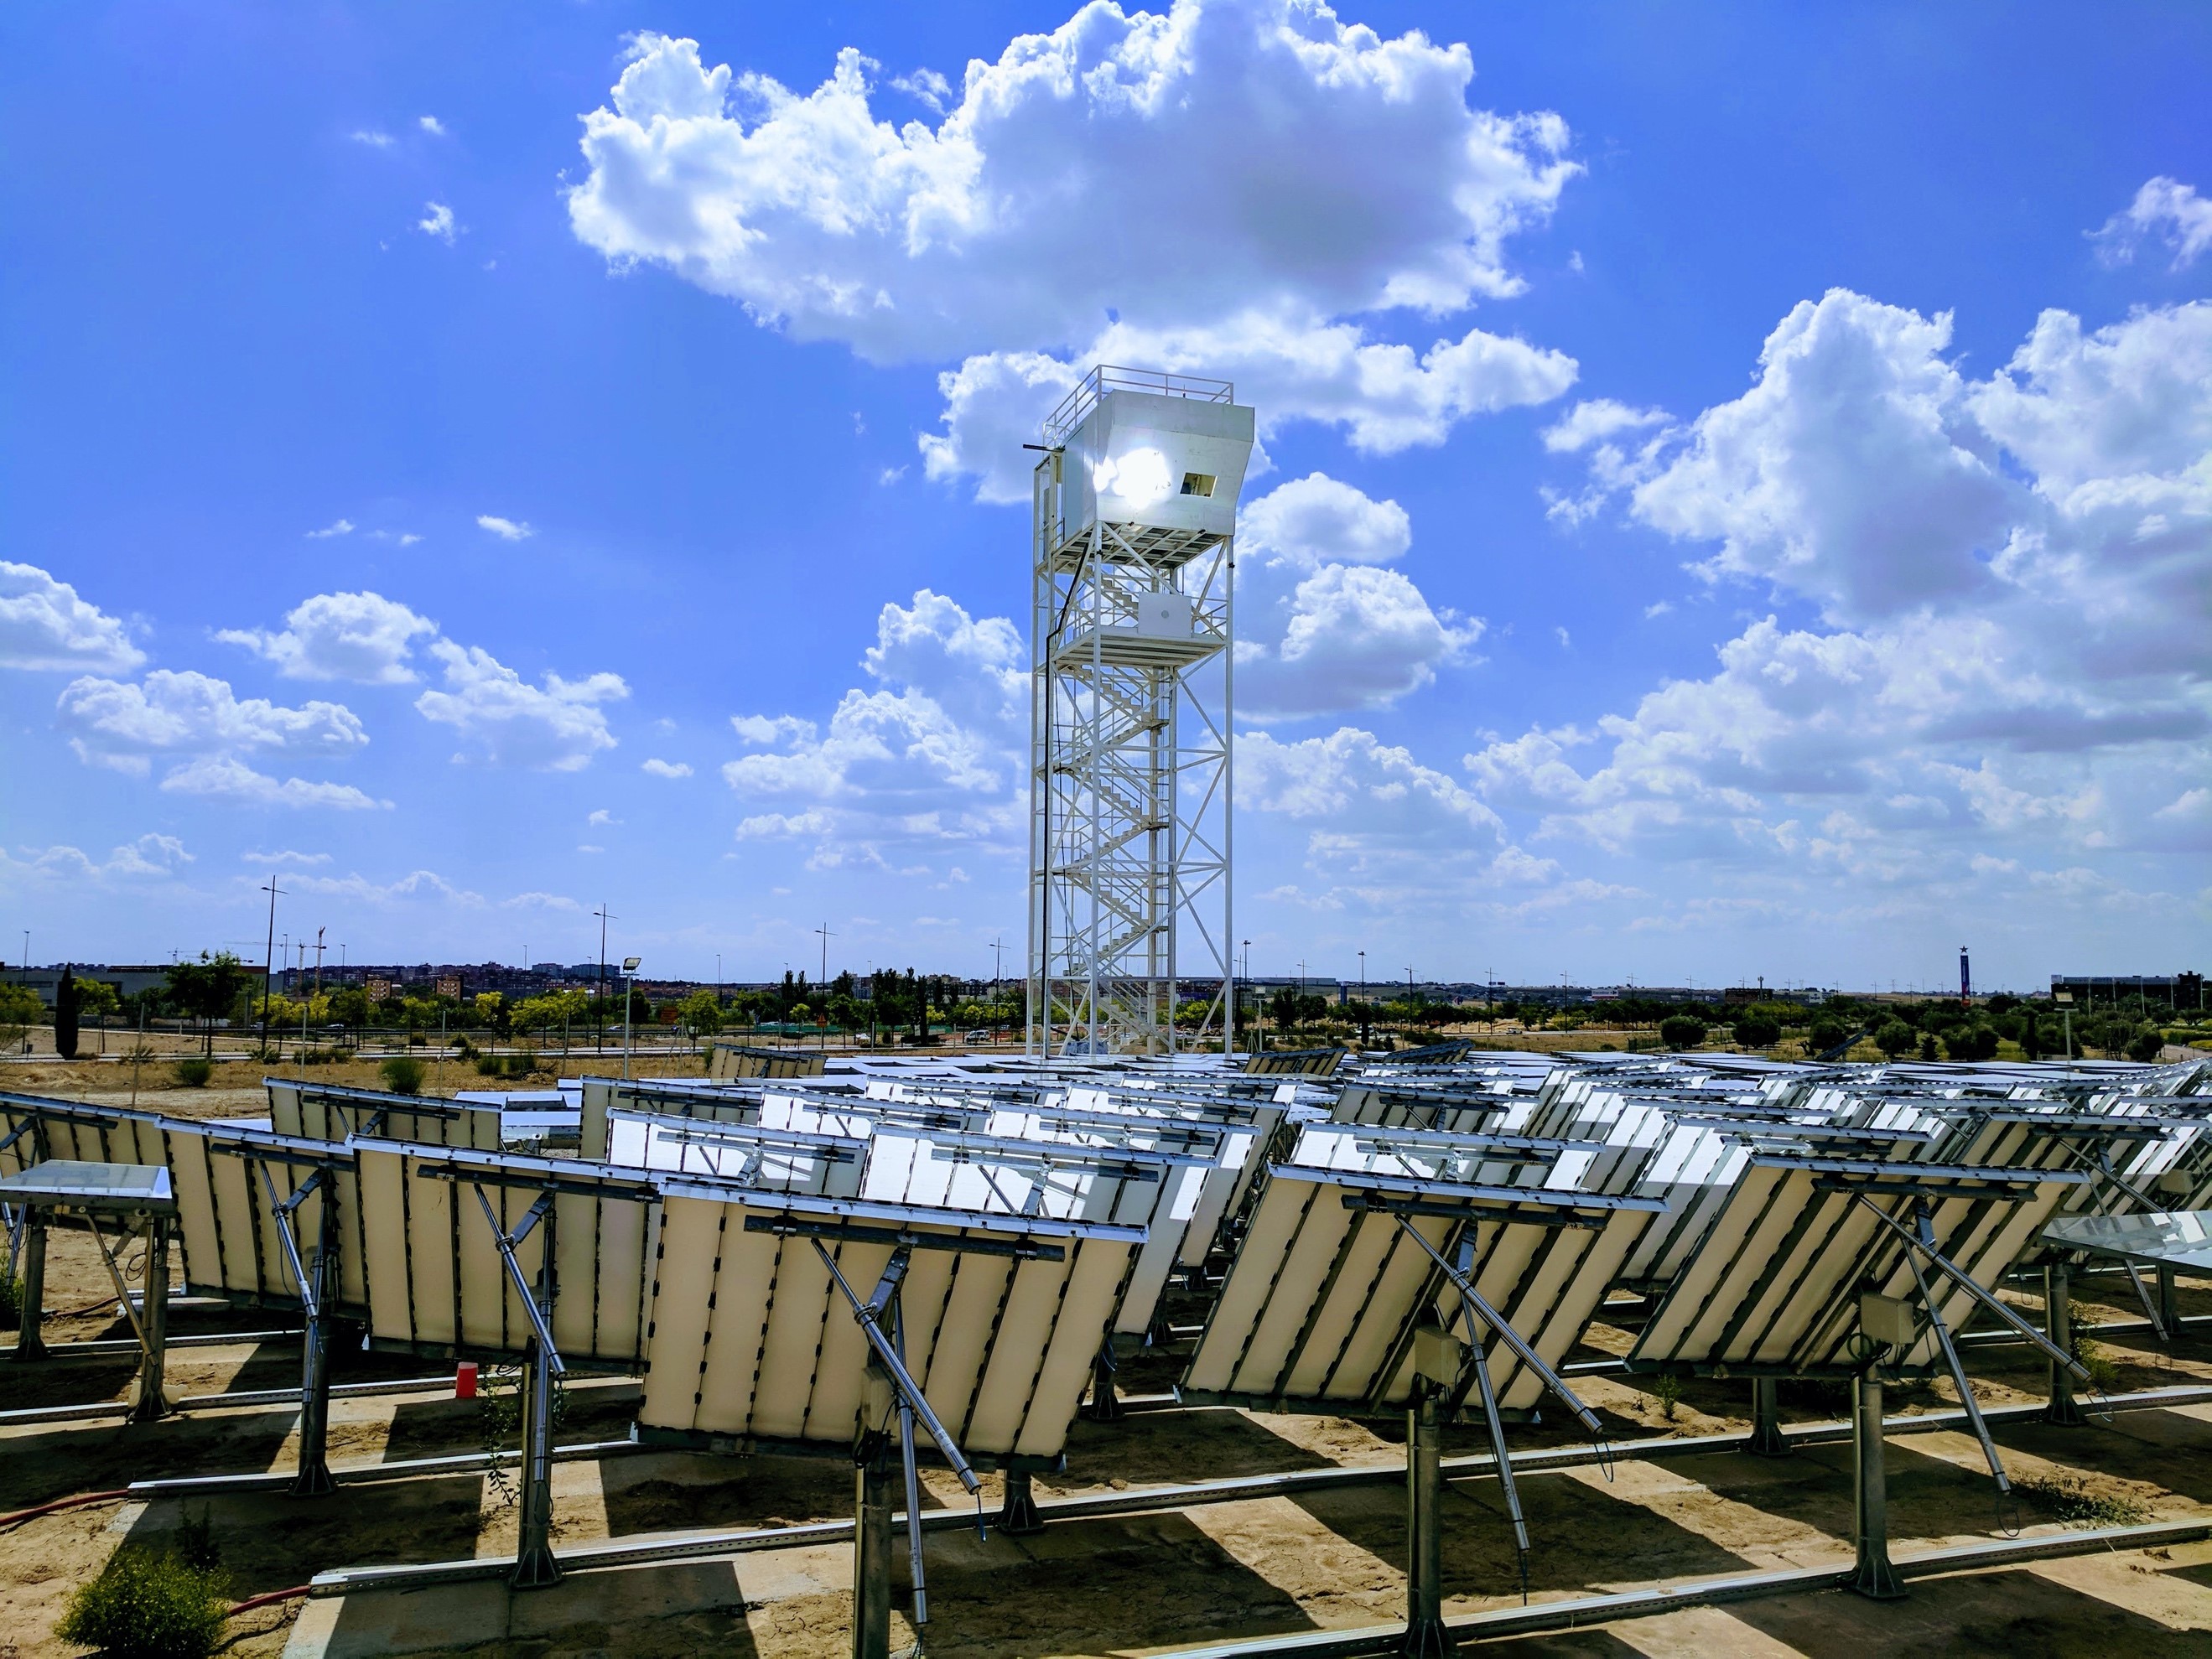 Solar tower fuel plant during operation CREDIT IMDEA Energy